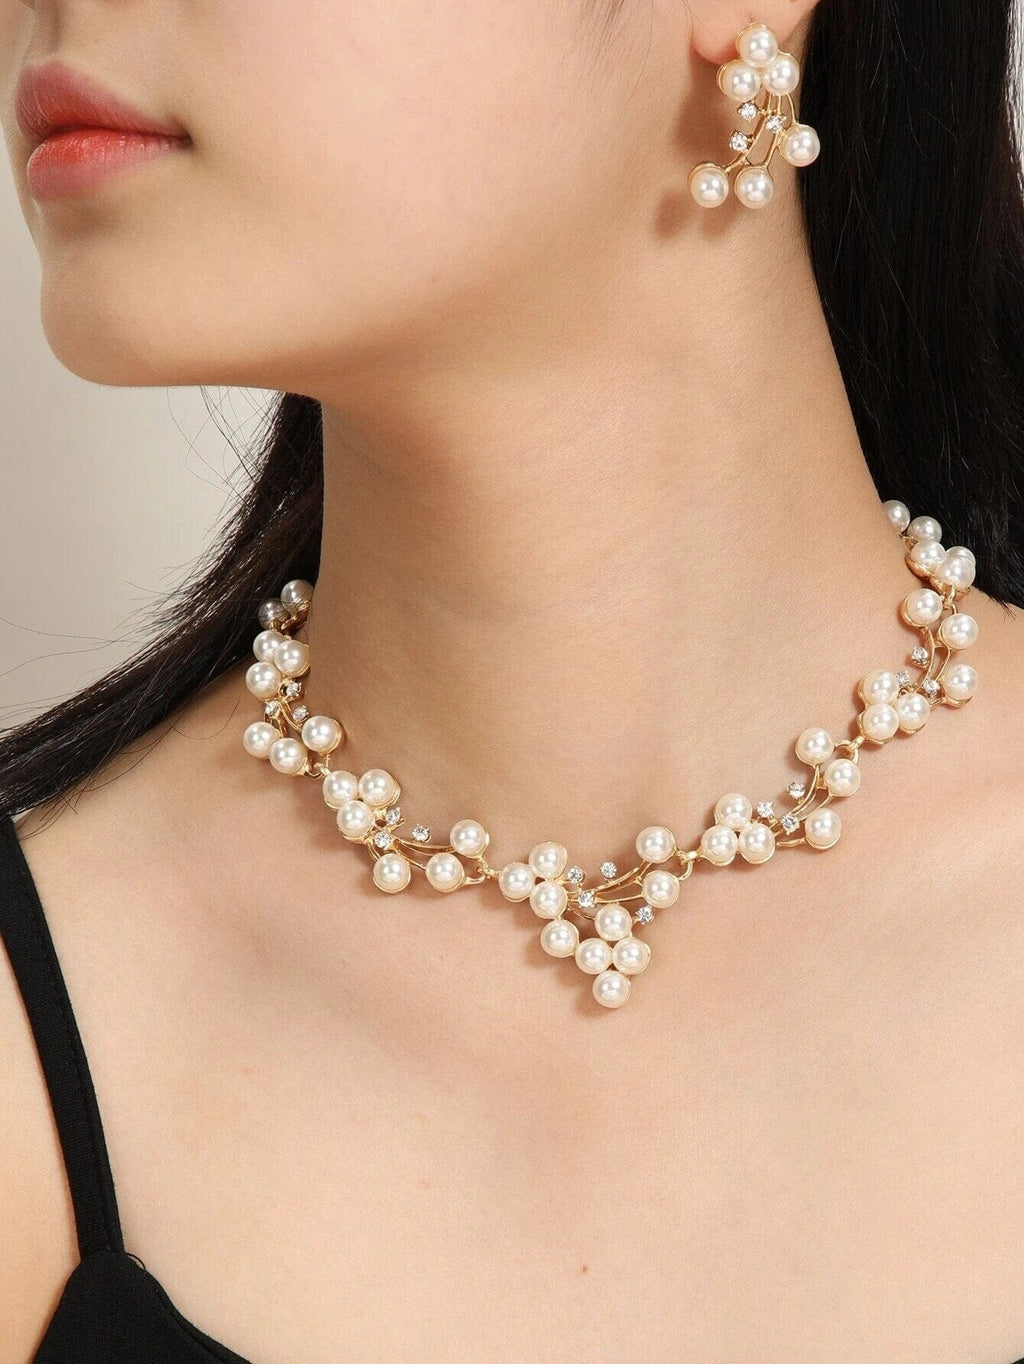 Bridal Big Pearl Cluster Necklace and Earrings 3 PC Jewelry Set, Large Pearl Prom Earrings and a Choker Necklace Wedding 3 PC Jewelry Set - KaleaBoutique.com